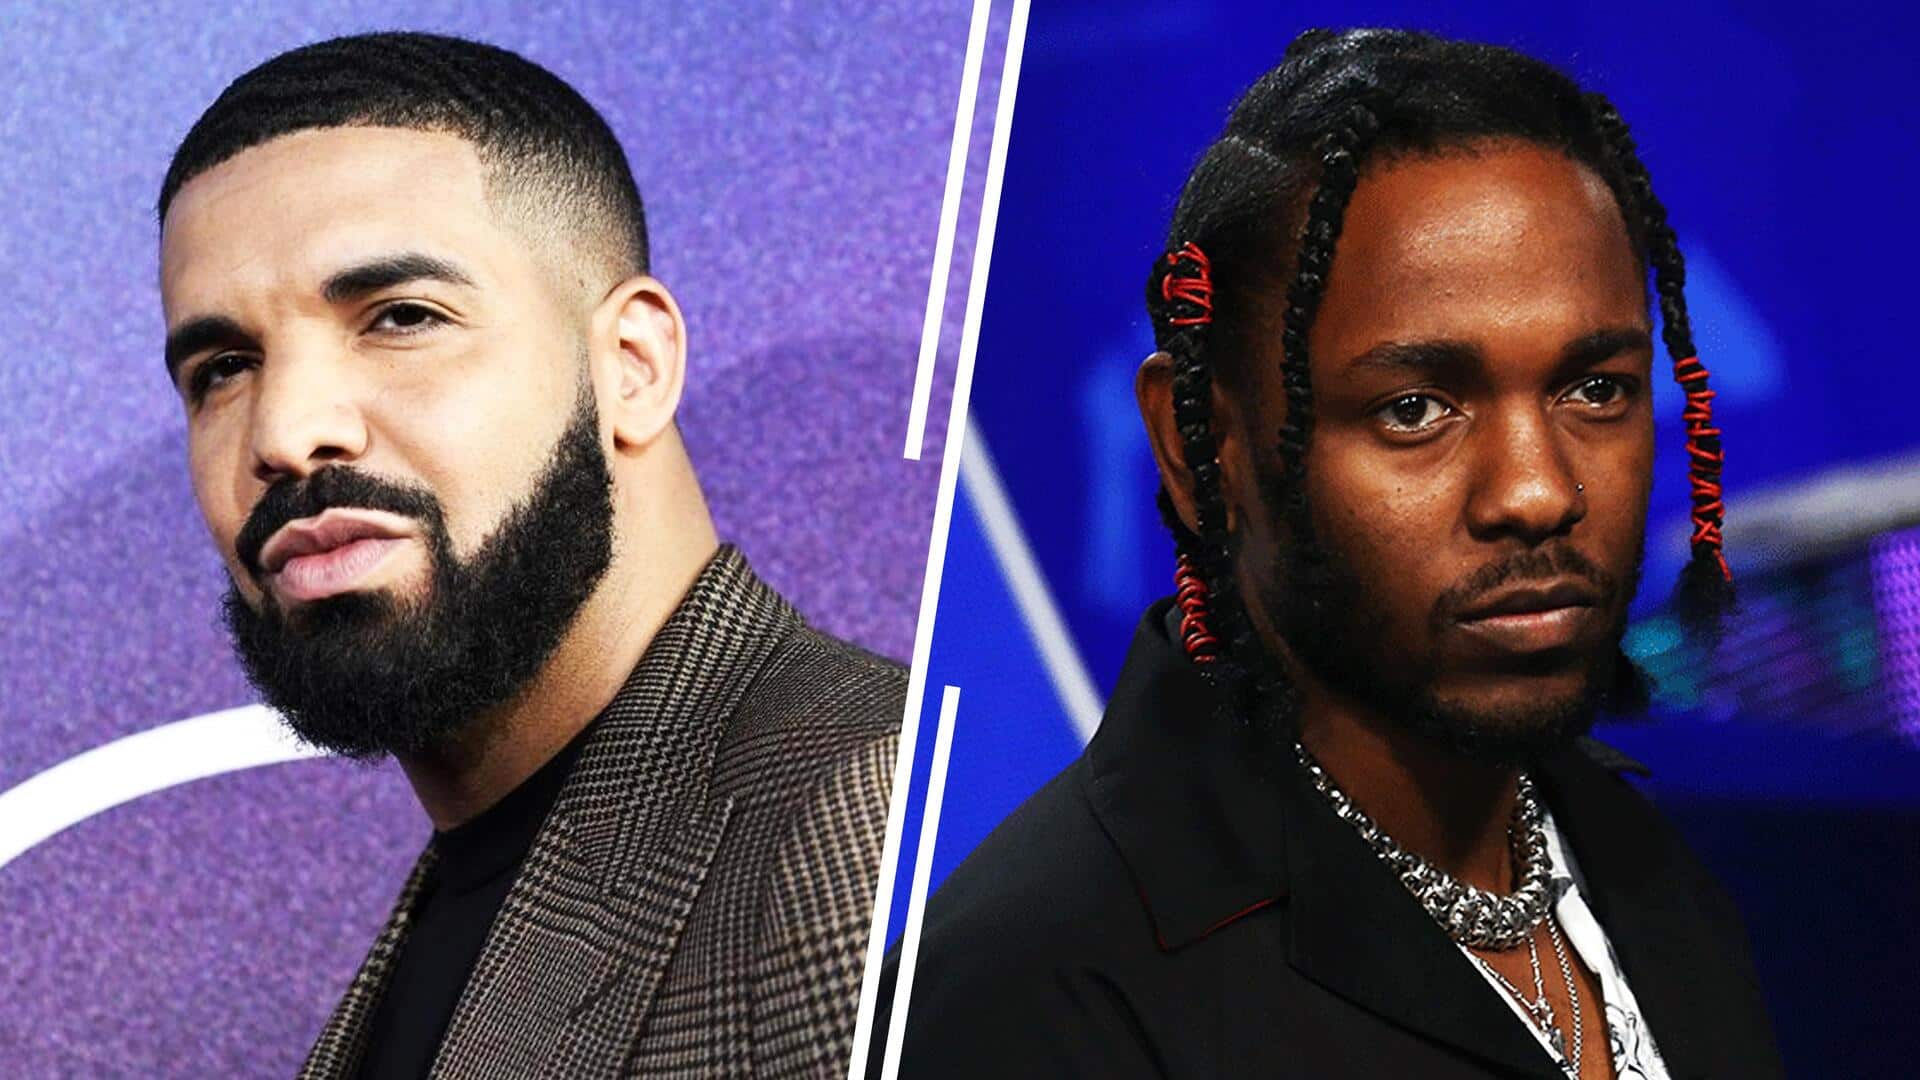 Why are Drake, Kendrick Lamar at odds? Intense rivalry explained